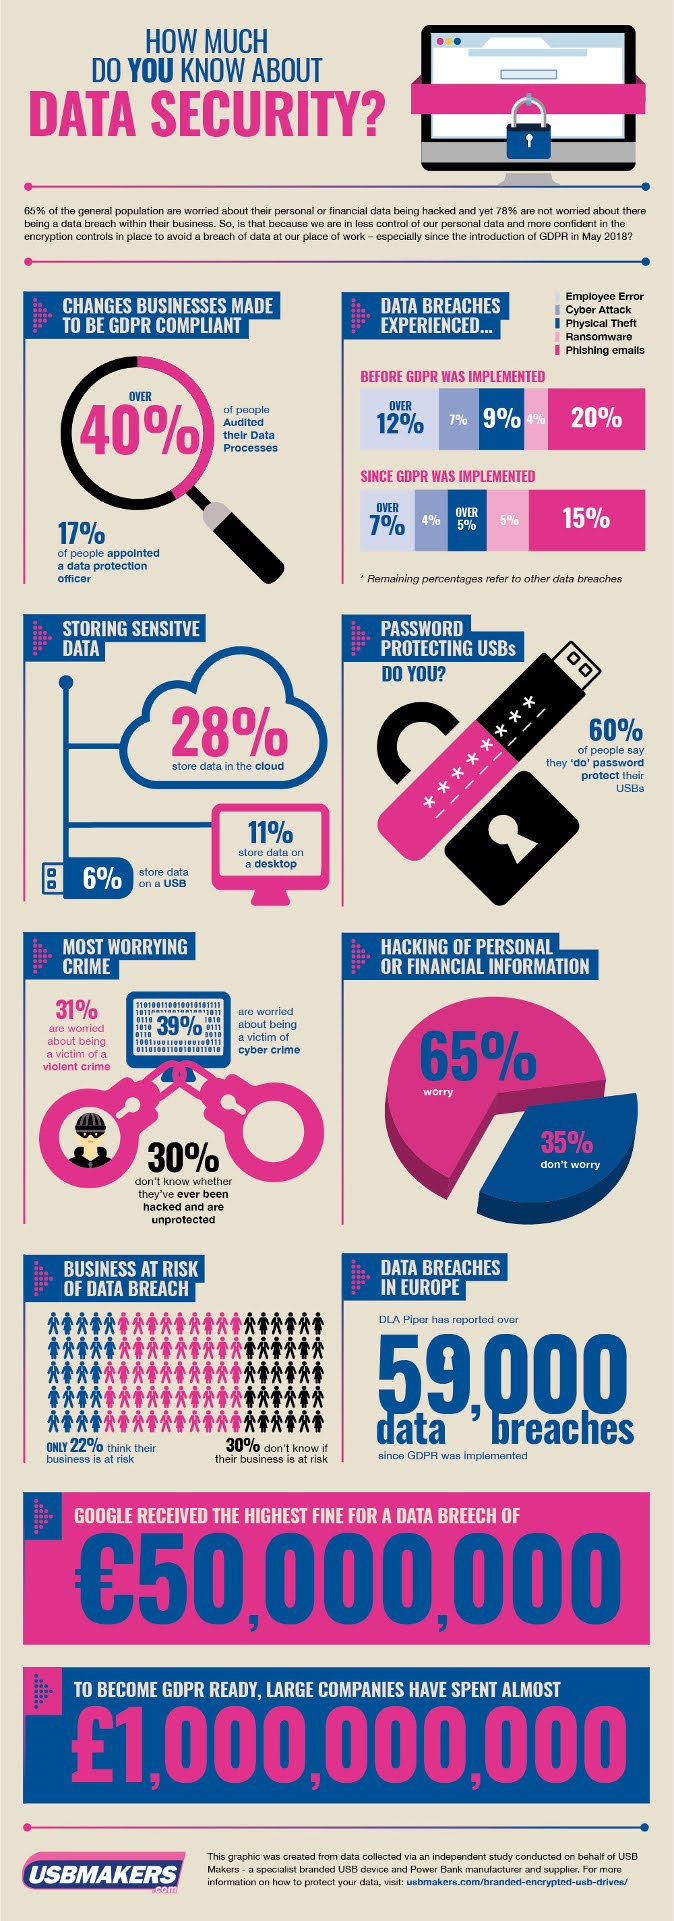 How Much Do You Know About Data Security? #infographic